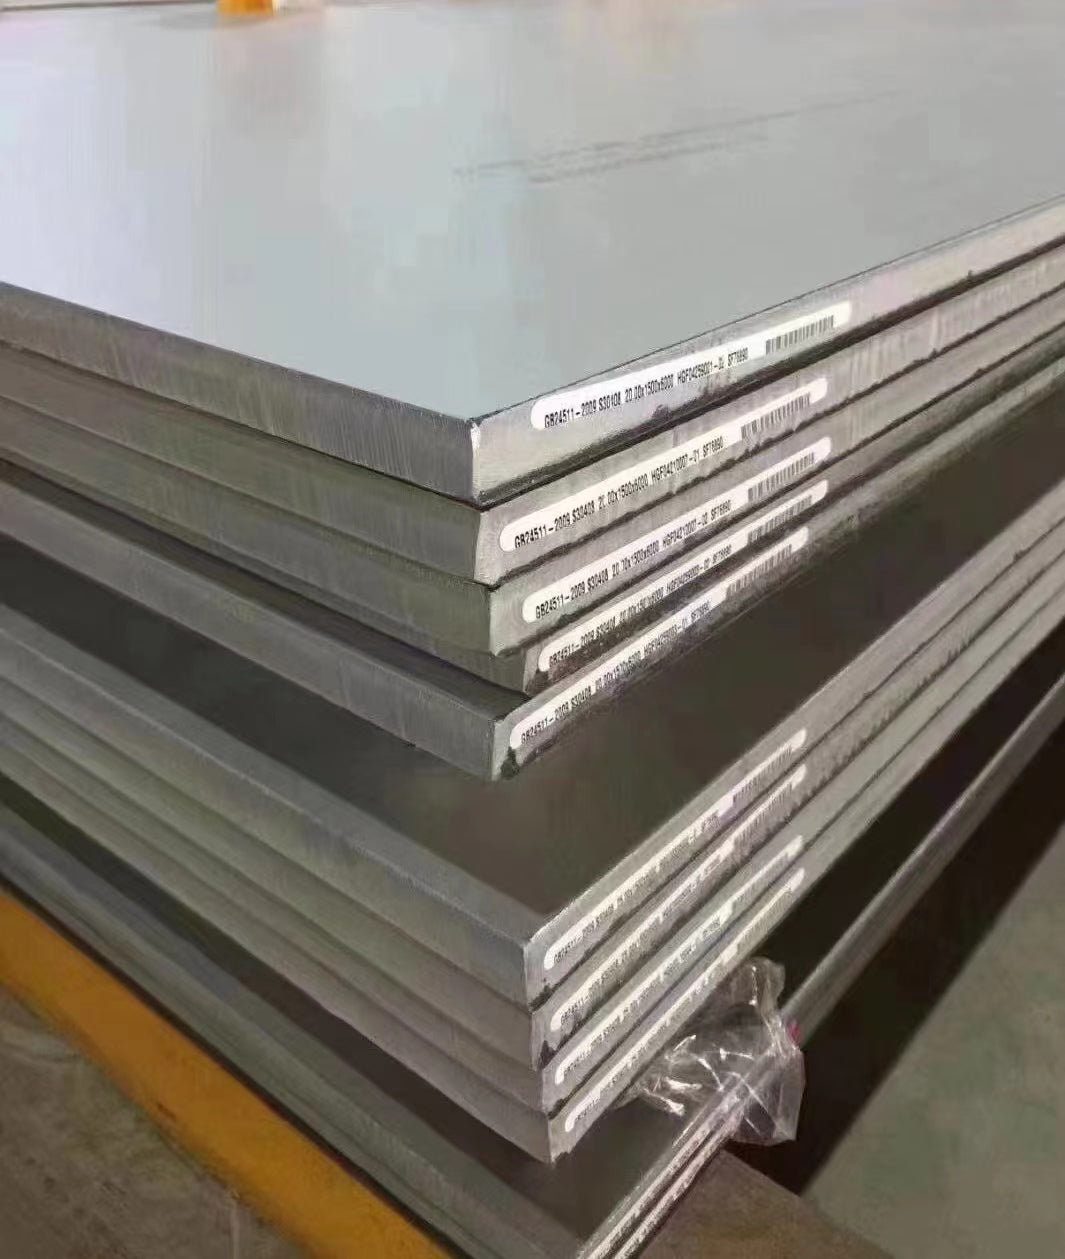 Stainless Steel Sheet & Plate